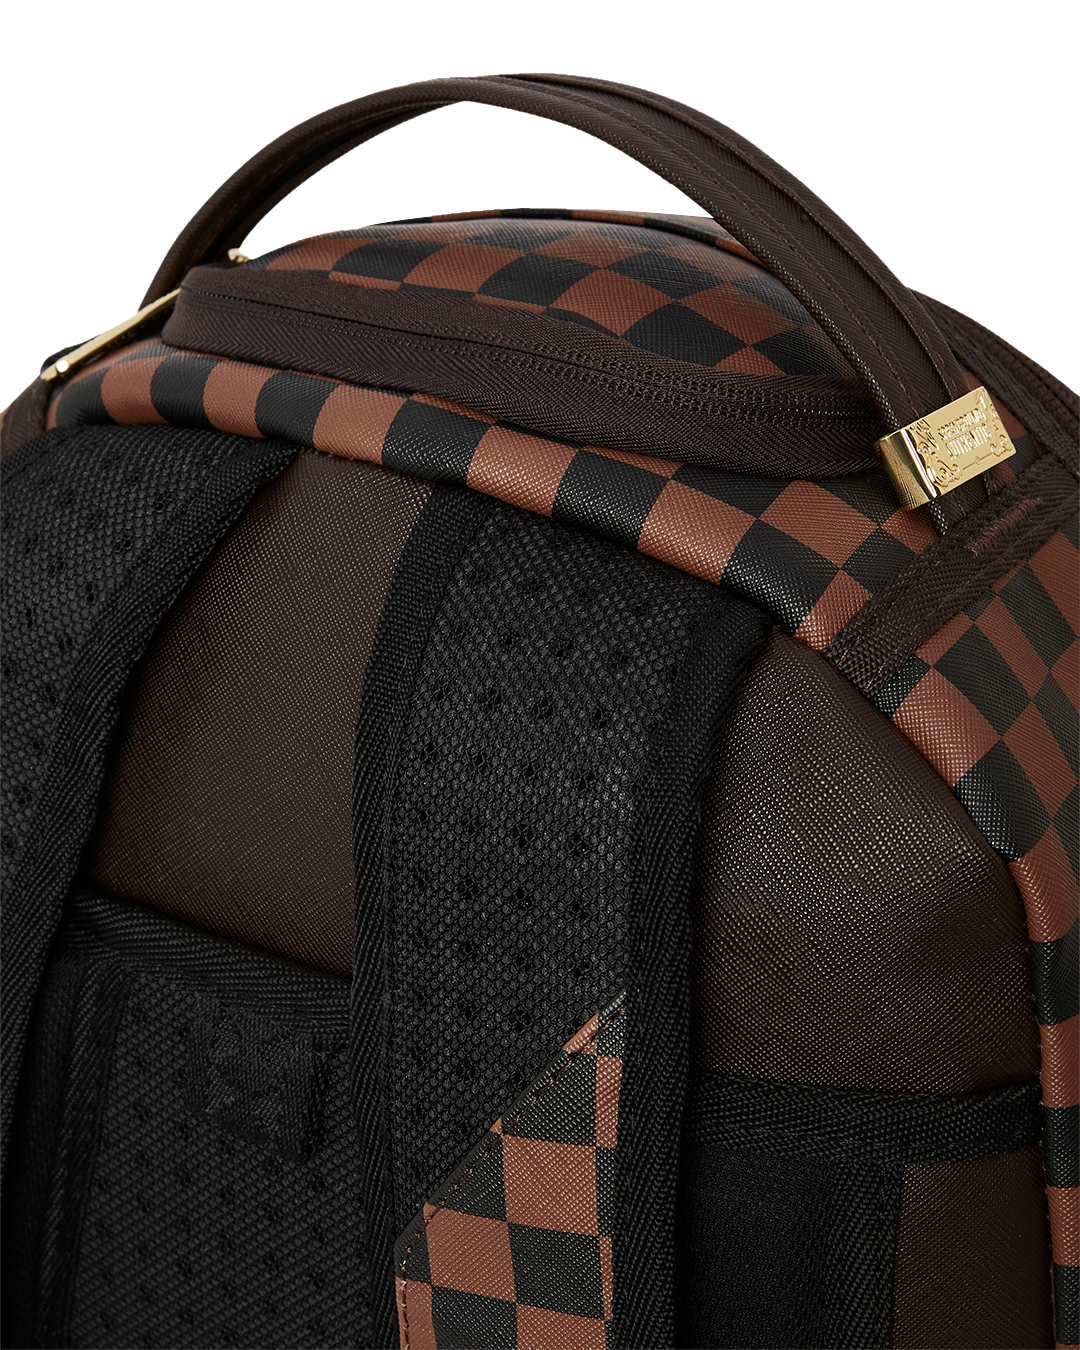 Download Red Bape Backpack - Louis Vuitton Sprayground - Full Size PNG  Image - PNGkit